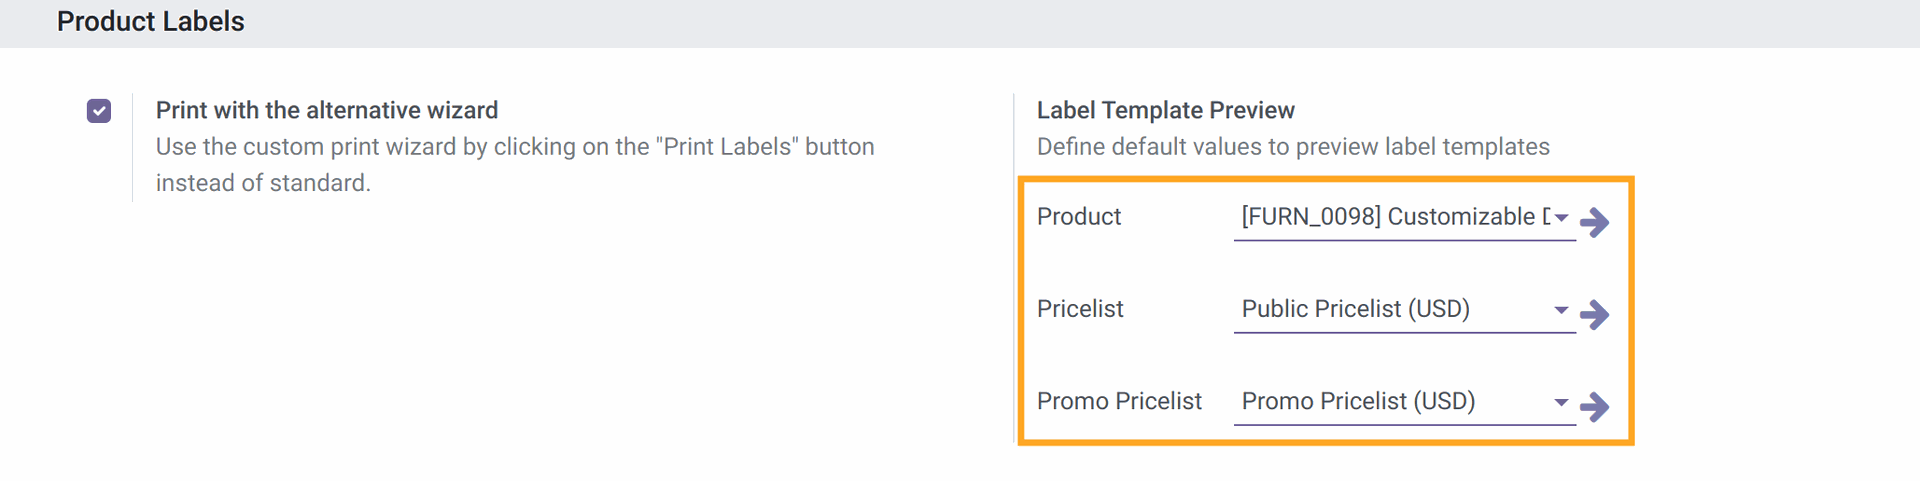 odoo product label preview settings